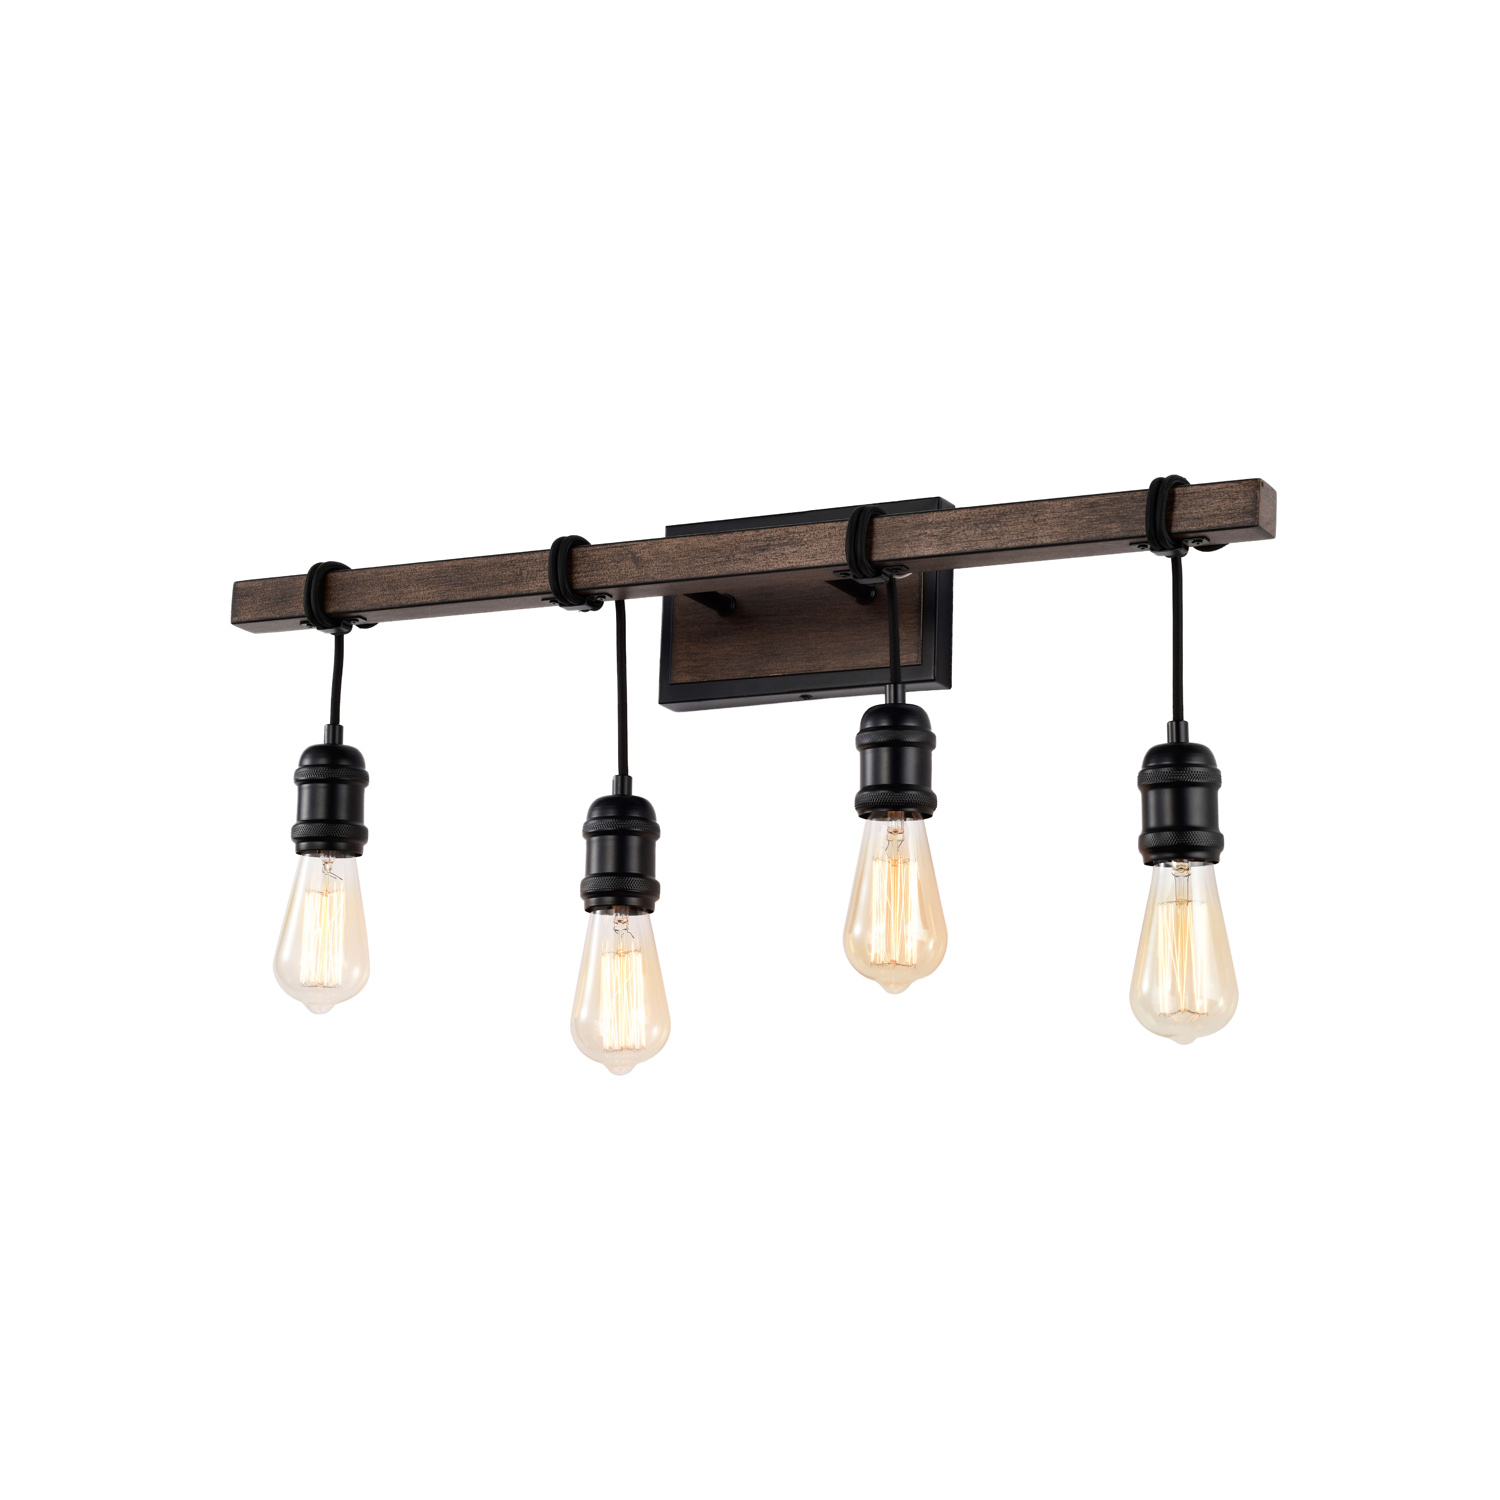 Betisa 4-light Antique Black and Faux Wood Grain Finish Wall Sconce LJ-6251-EWL